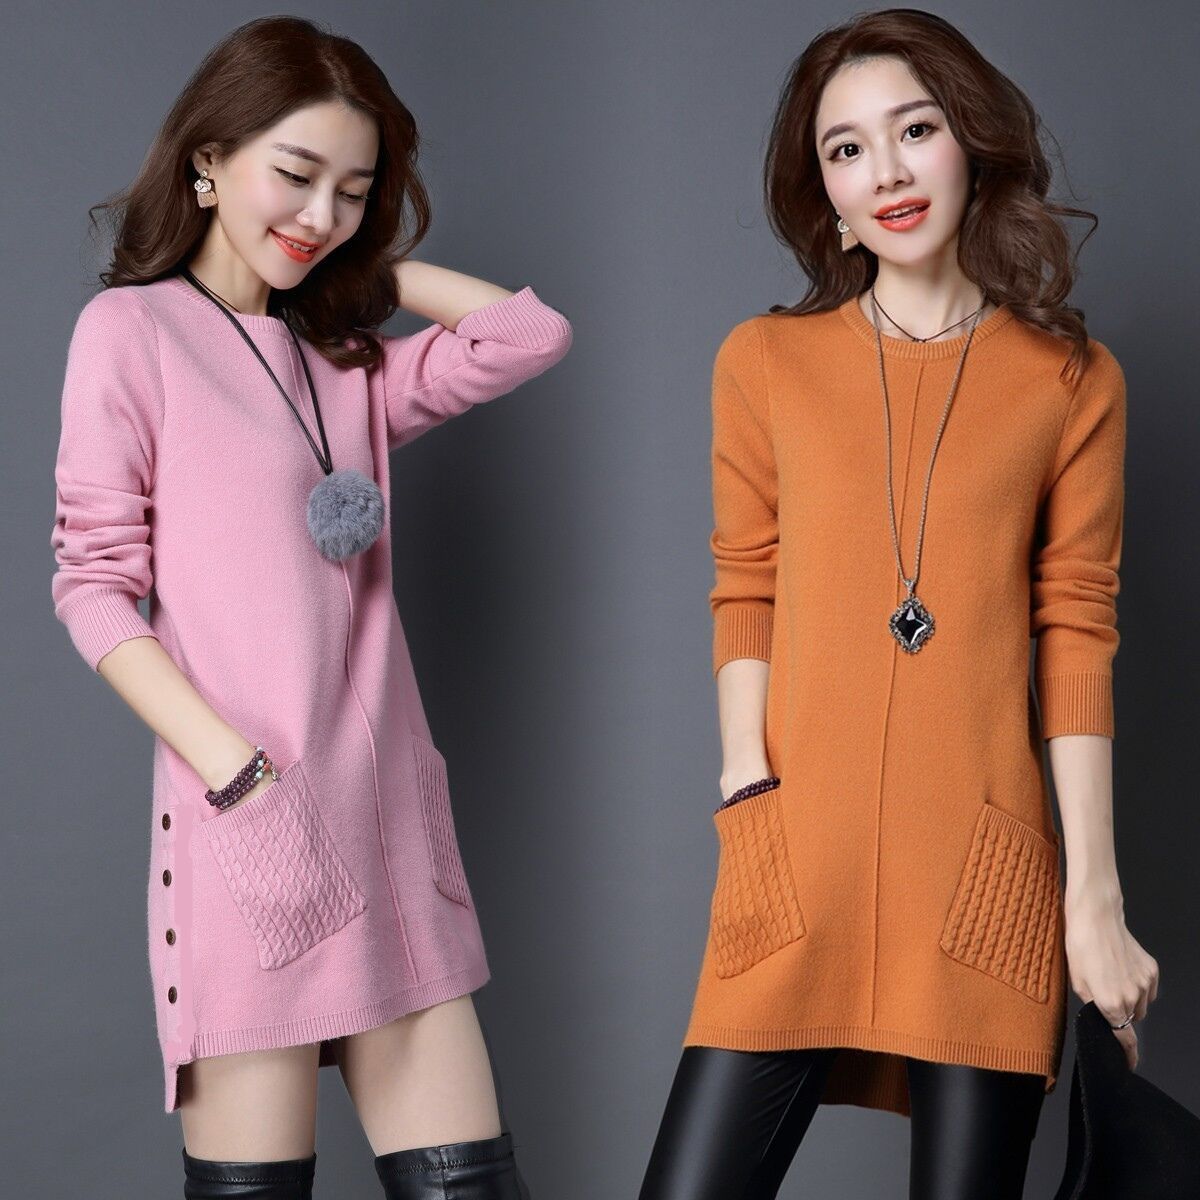 Mid-length sweater women's pullover fash...